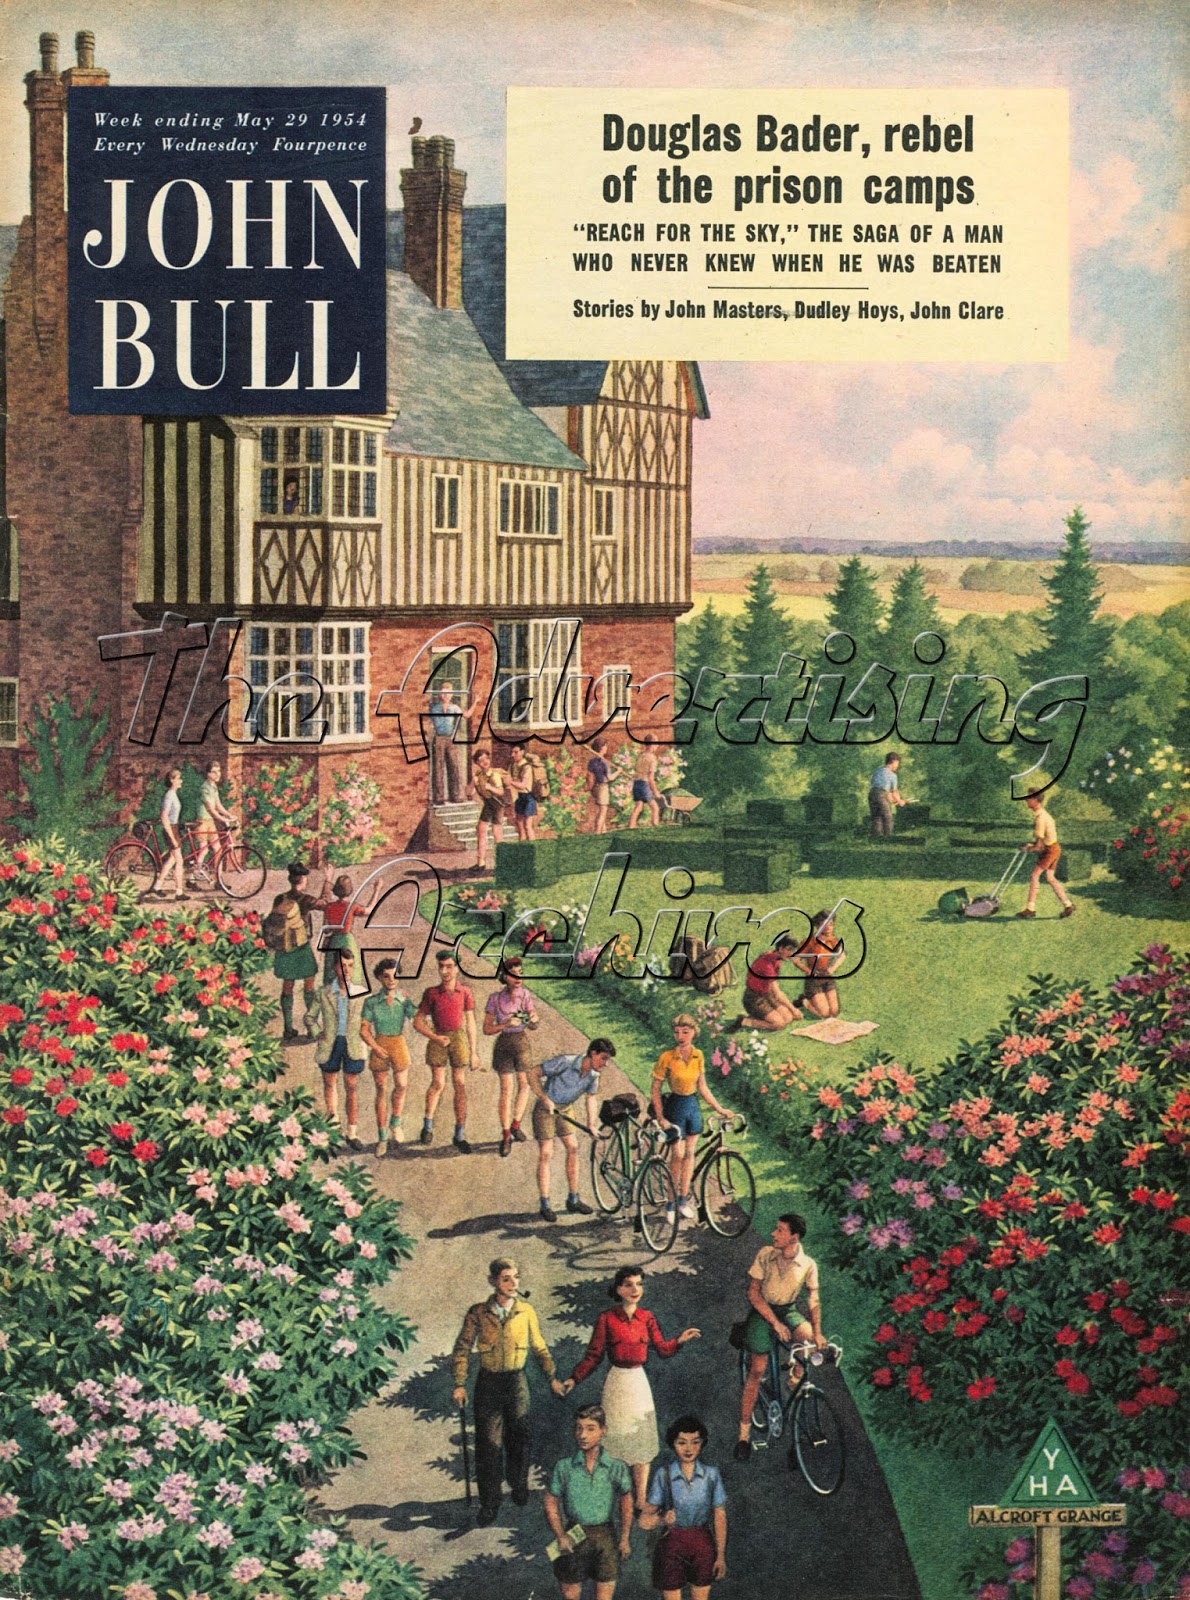 http://www.advertisingarchives.co.uk/index.php?service=search&action=do_quick_search&language=en&q=john+bull+holidays